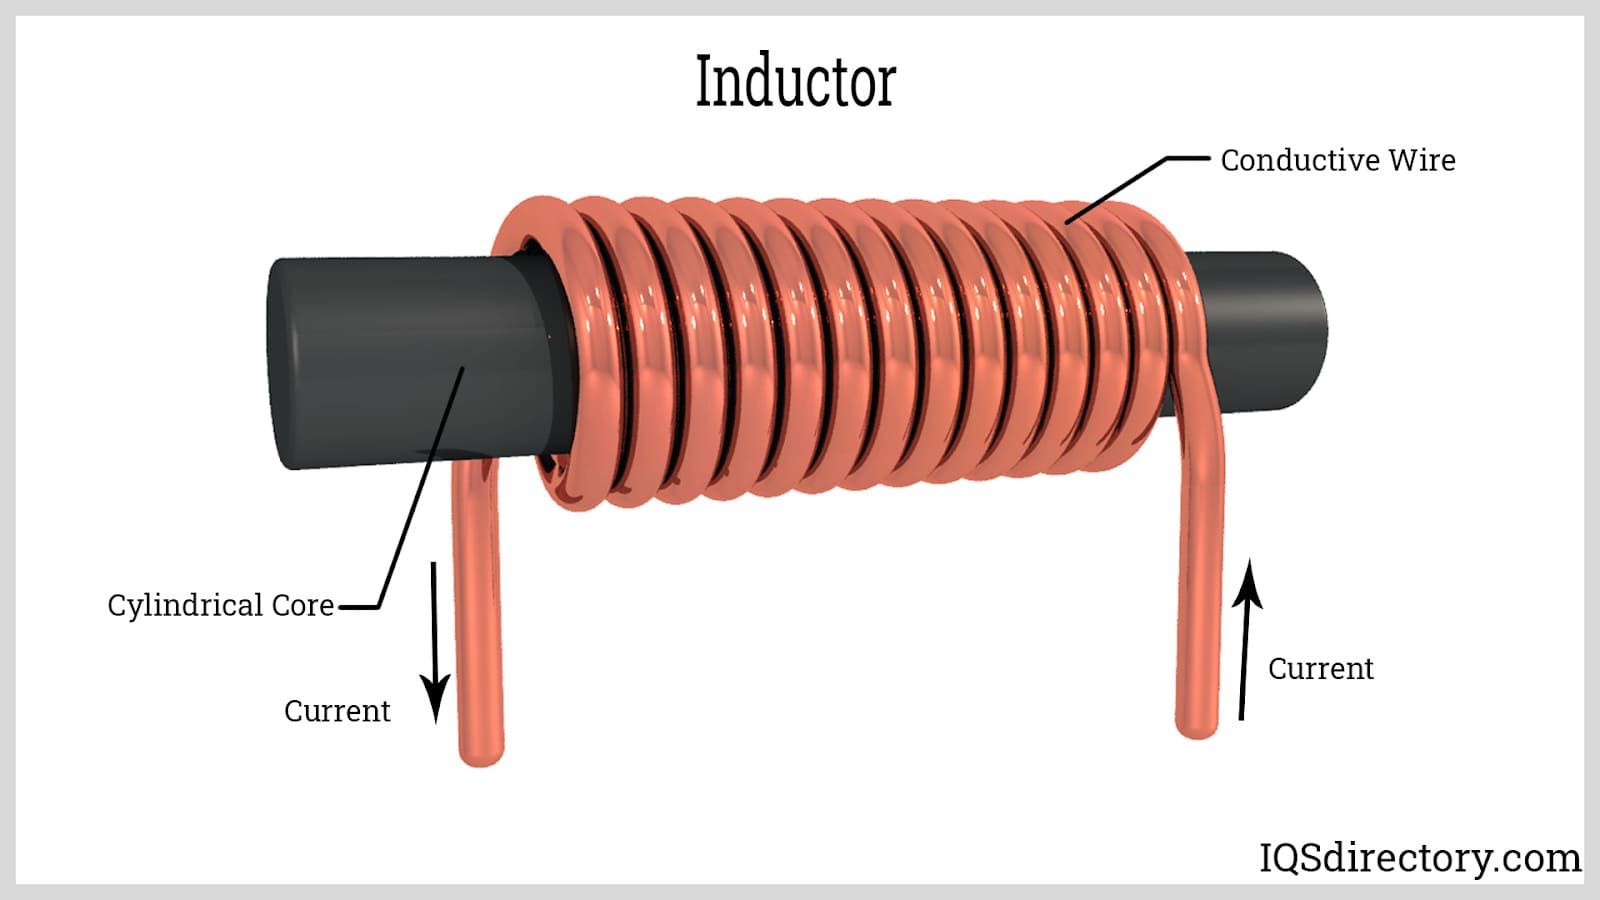 Inductor and Inductor Coils